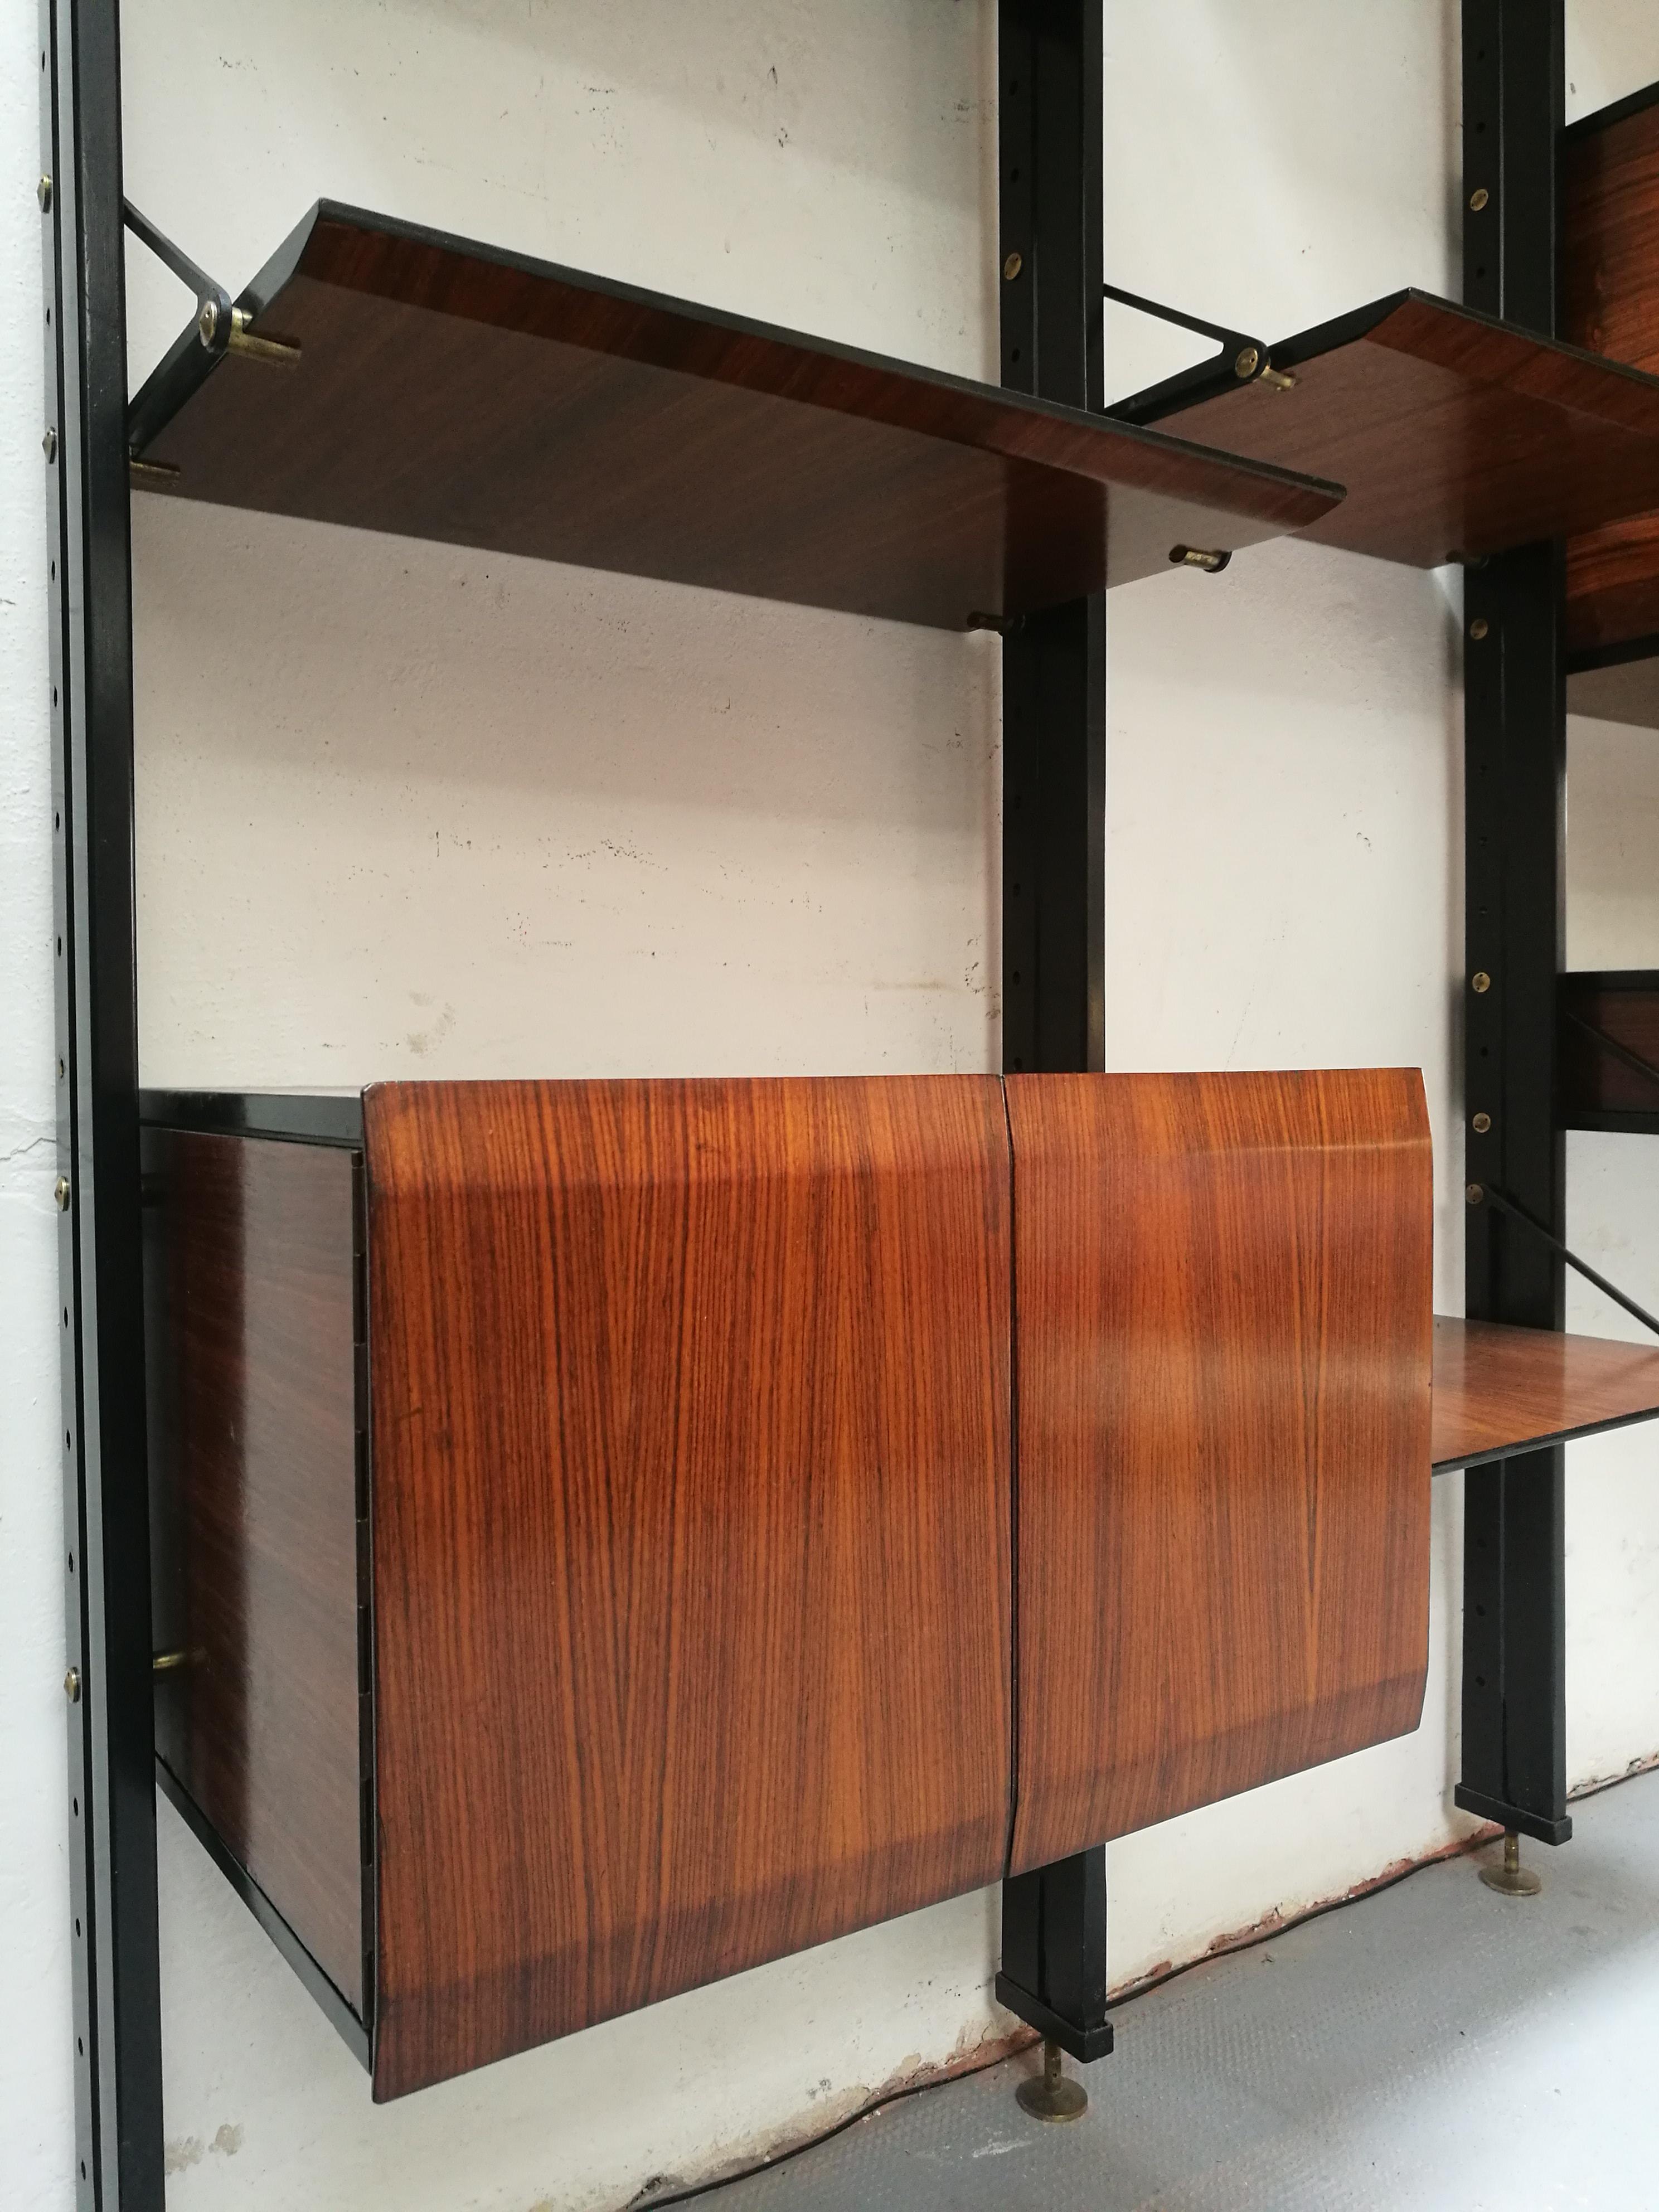 Rare bookcase by Luciano Frigerio di Desio, Milano, 1960s
Italian floor/ceiling bookshelf by Luciano Frigerio Di Desio, Milano, made in rosewood and steel, with solid brass details.
This unique bookshelf is composed by 2 cabinet, 1 bar cabinet, 1